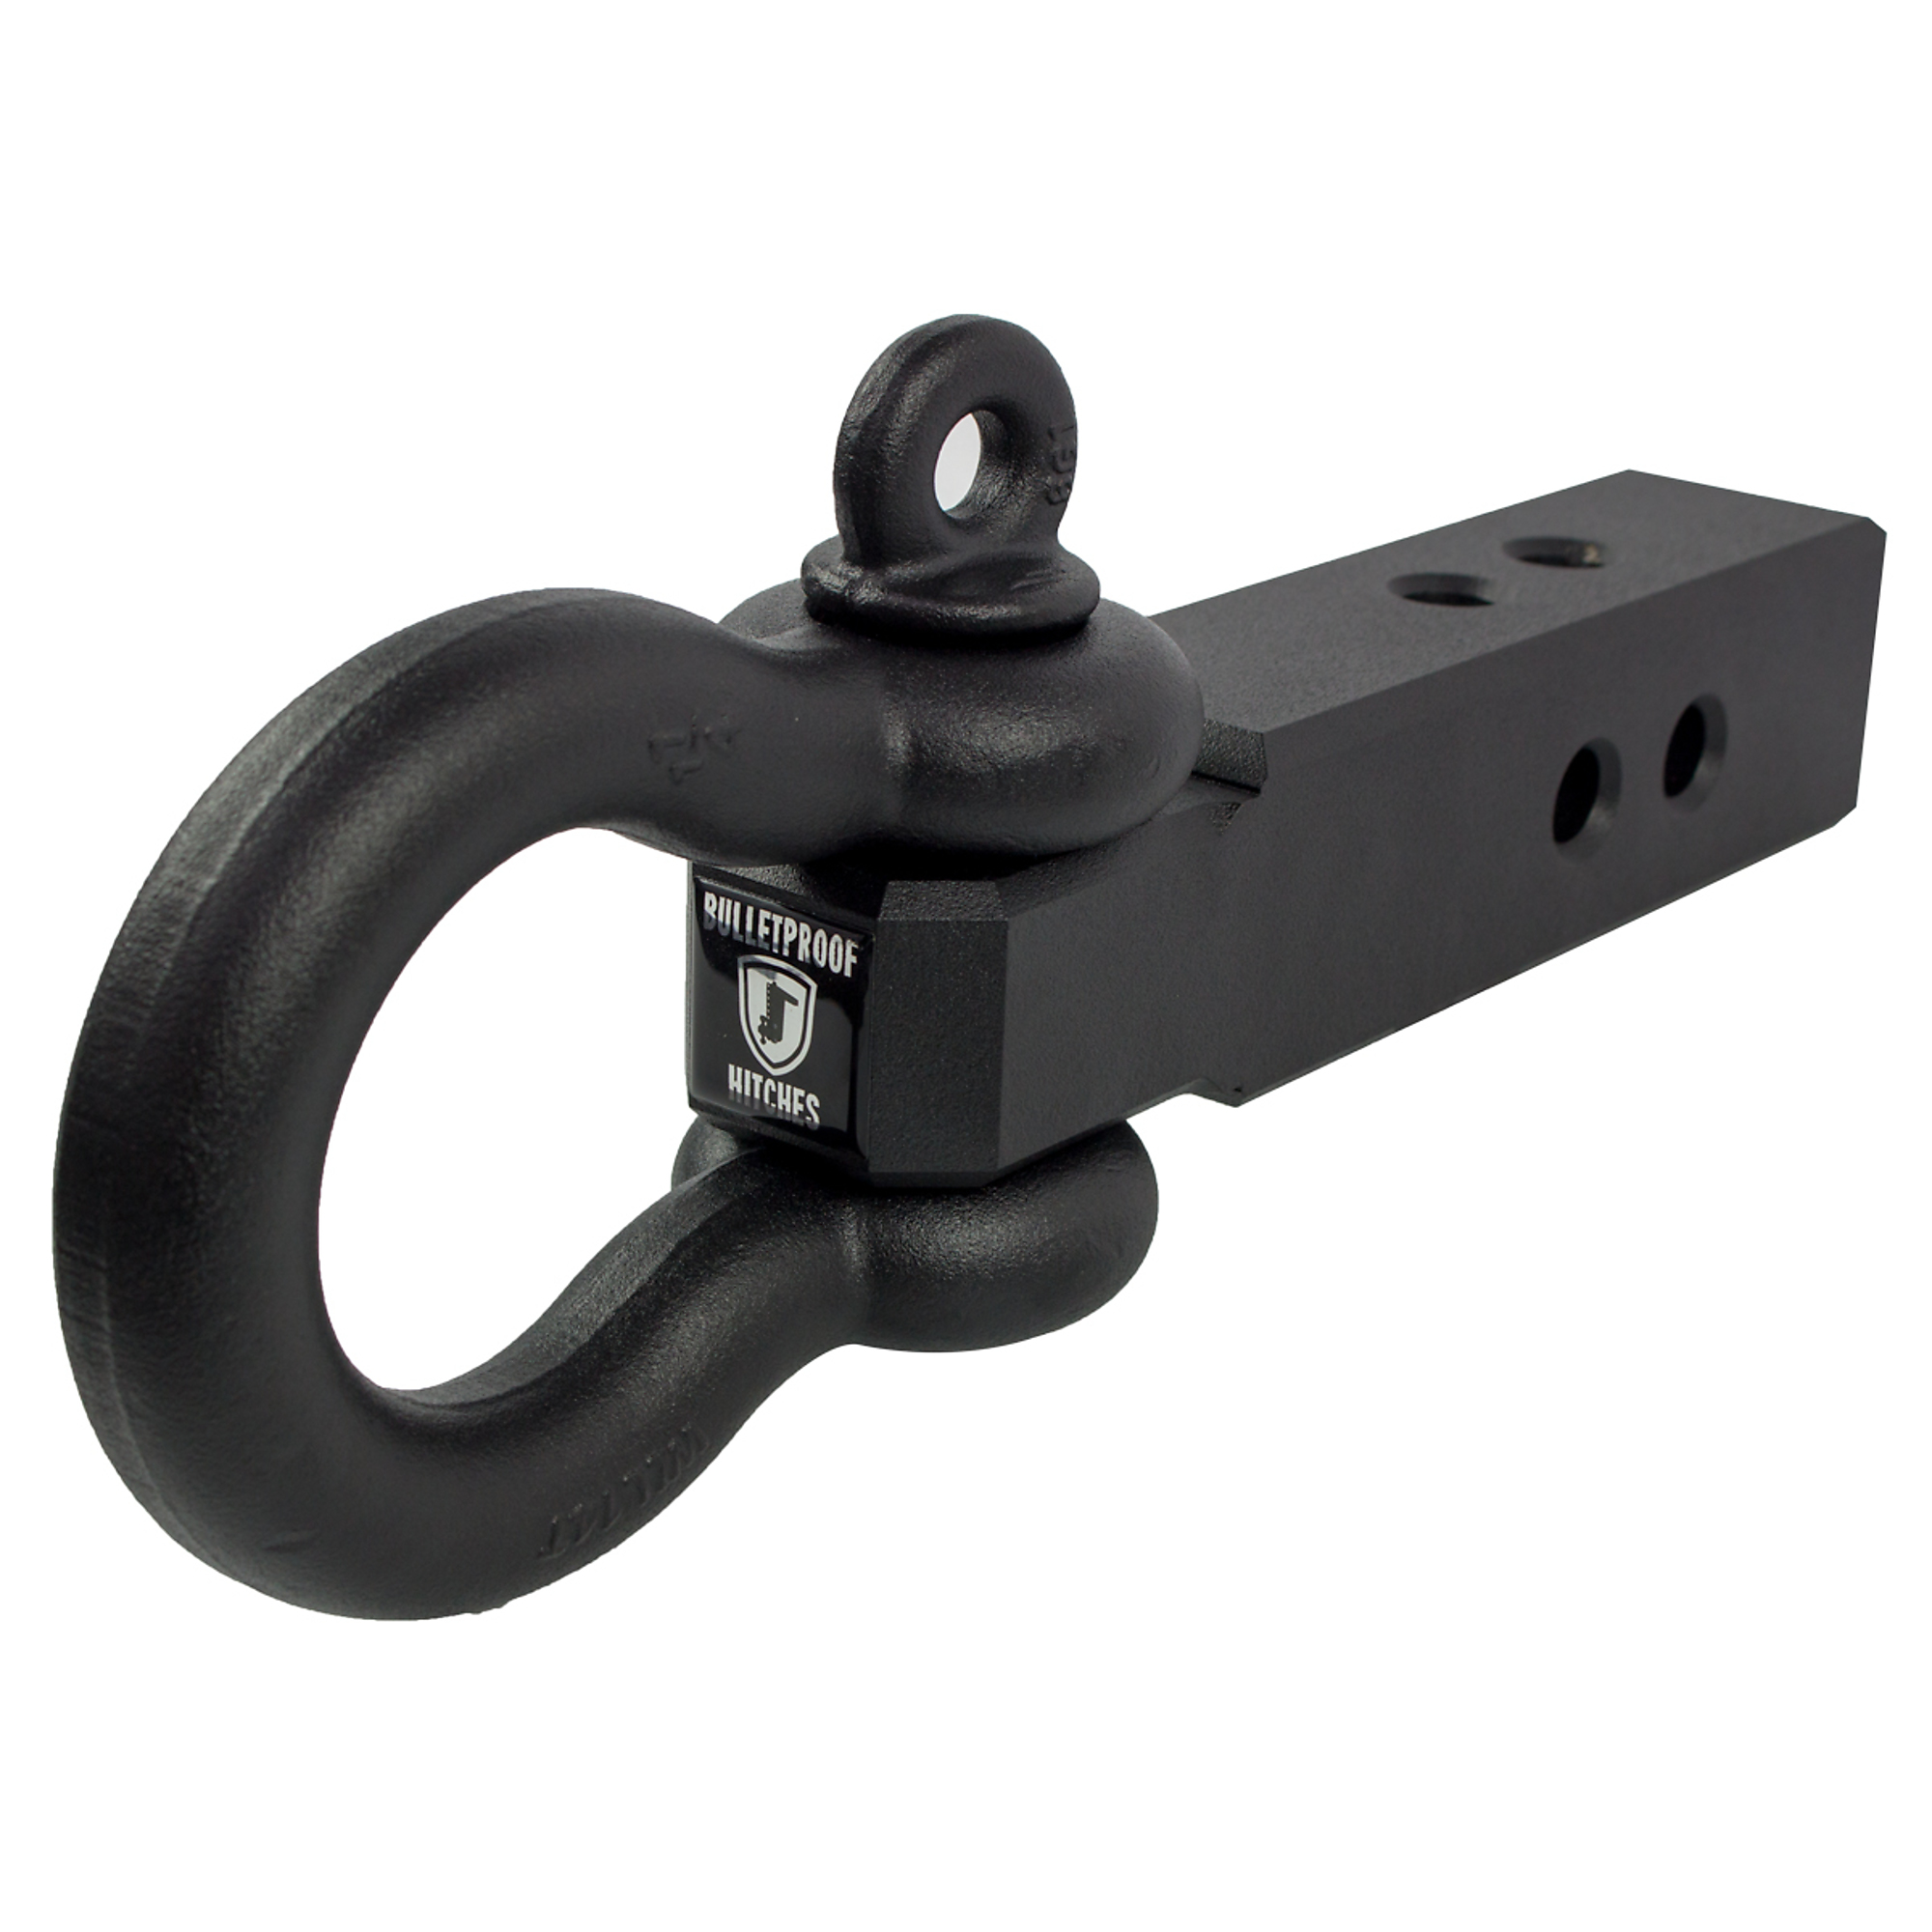 BulletProof Hitches, 2.5Inch EXTREME DUTY RECEIVER SHACKLE, Fits Receiver Size 2-1/2 in, Model ED25SHACKLE